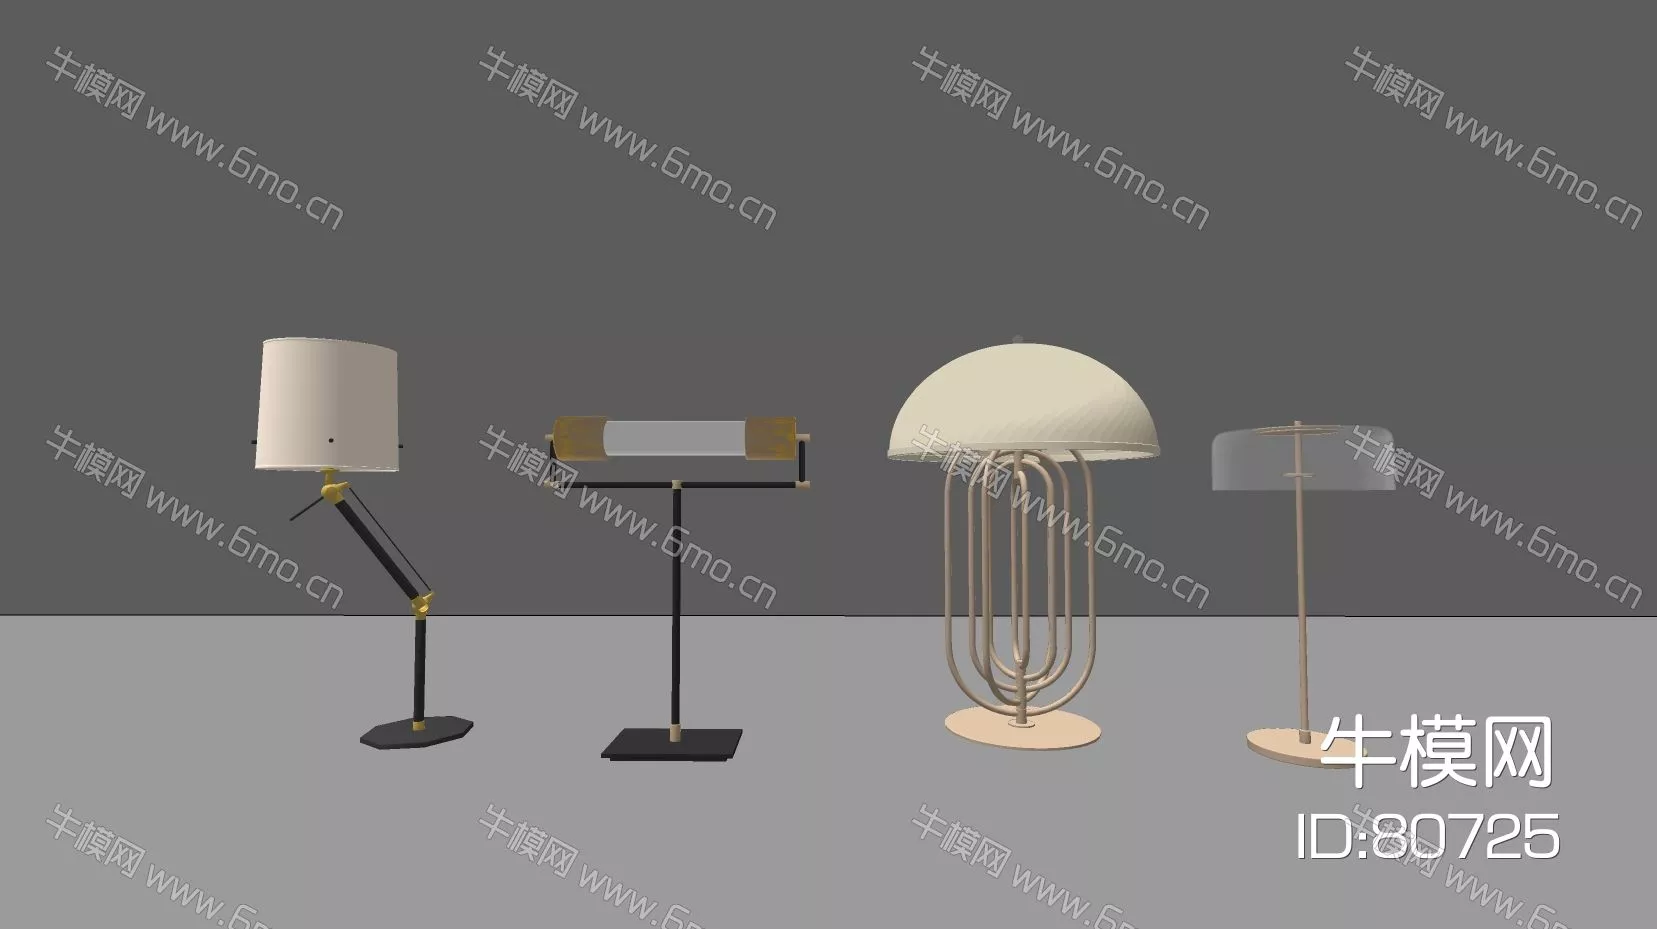 CHINESE TABLE LAMP - SKETCHUP 3D MODEL - ENSCAPE - 80725